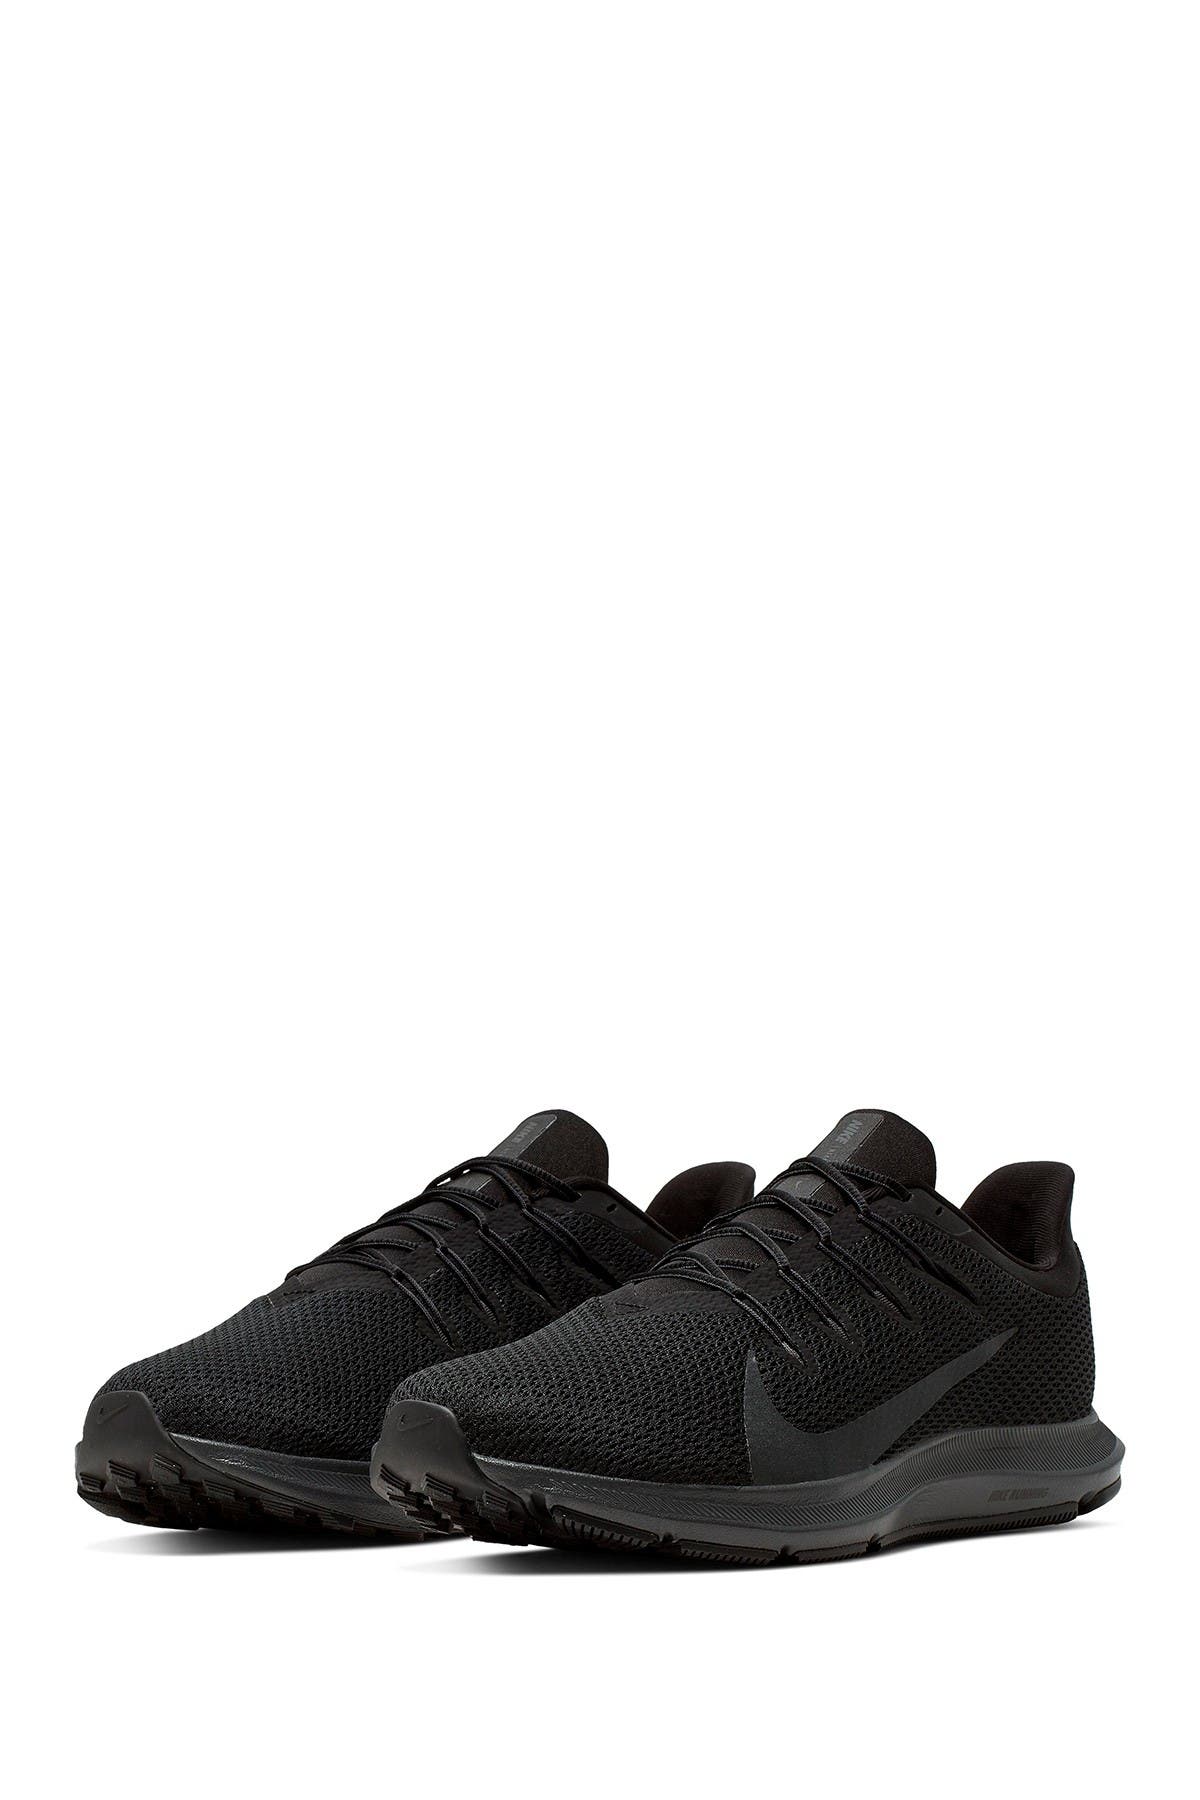 Nike | Quest 2 Running Shoe - Extra 